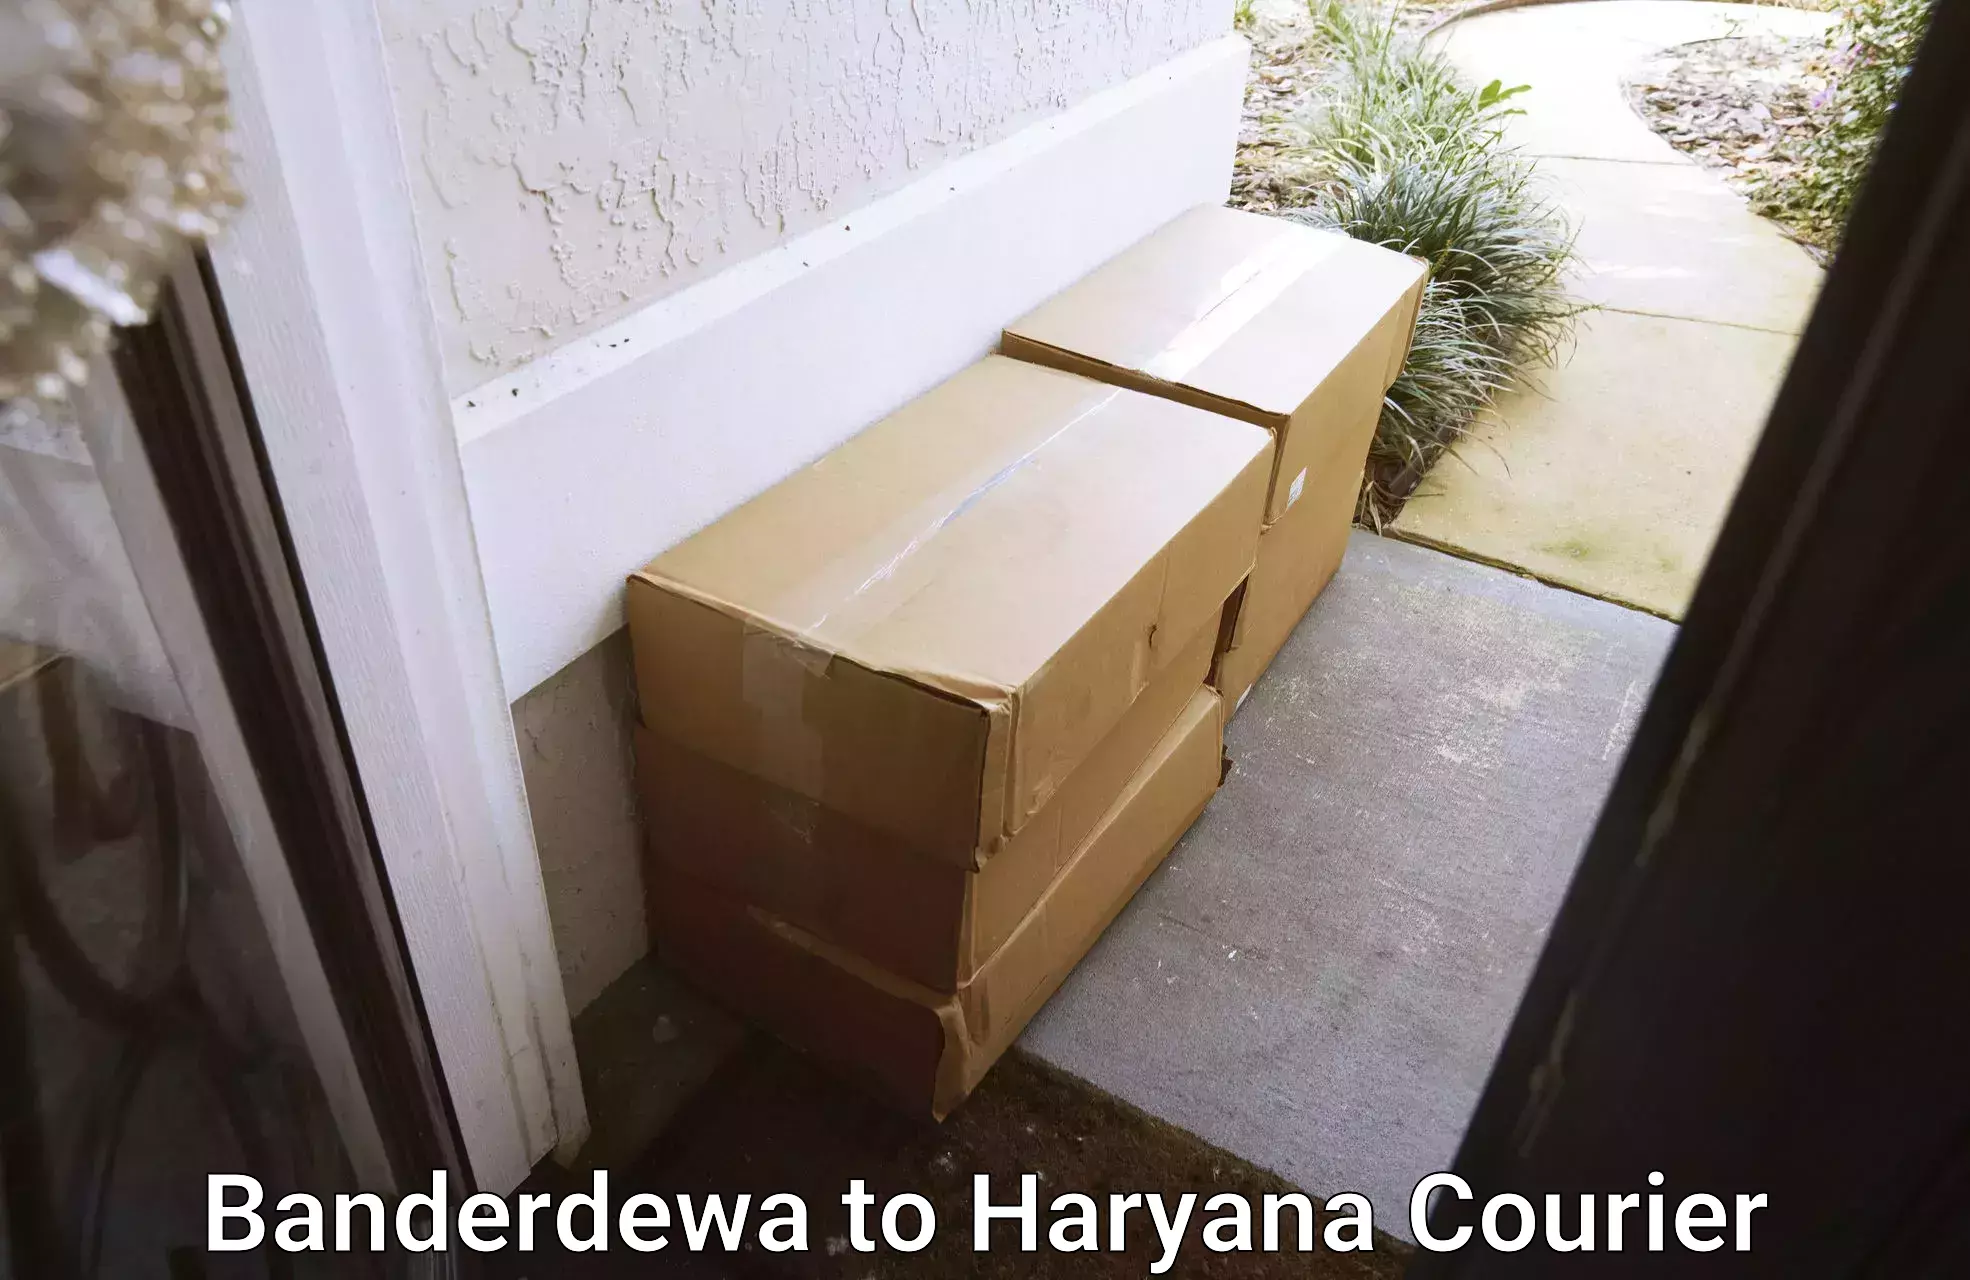 Same-day delivery solutions Banderdewa to Narwana